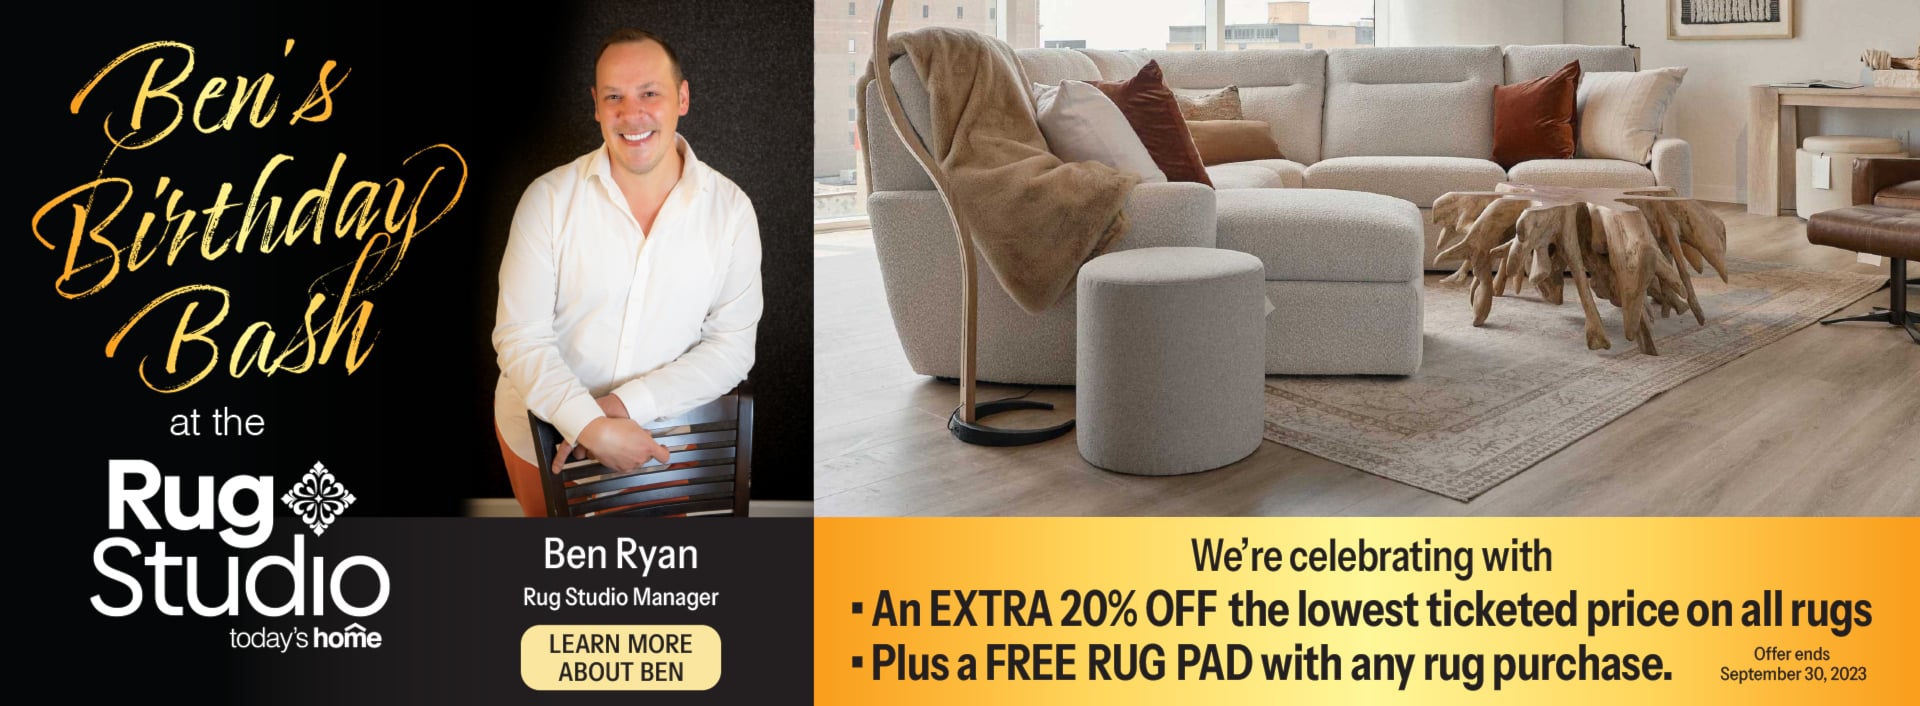 20% OFF the lowest ticketed price, FREE rug pad